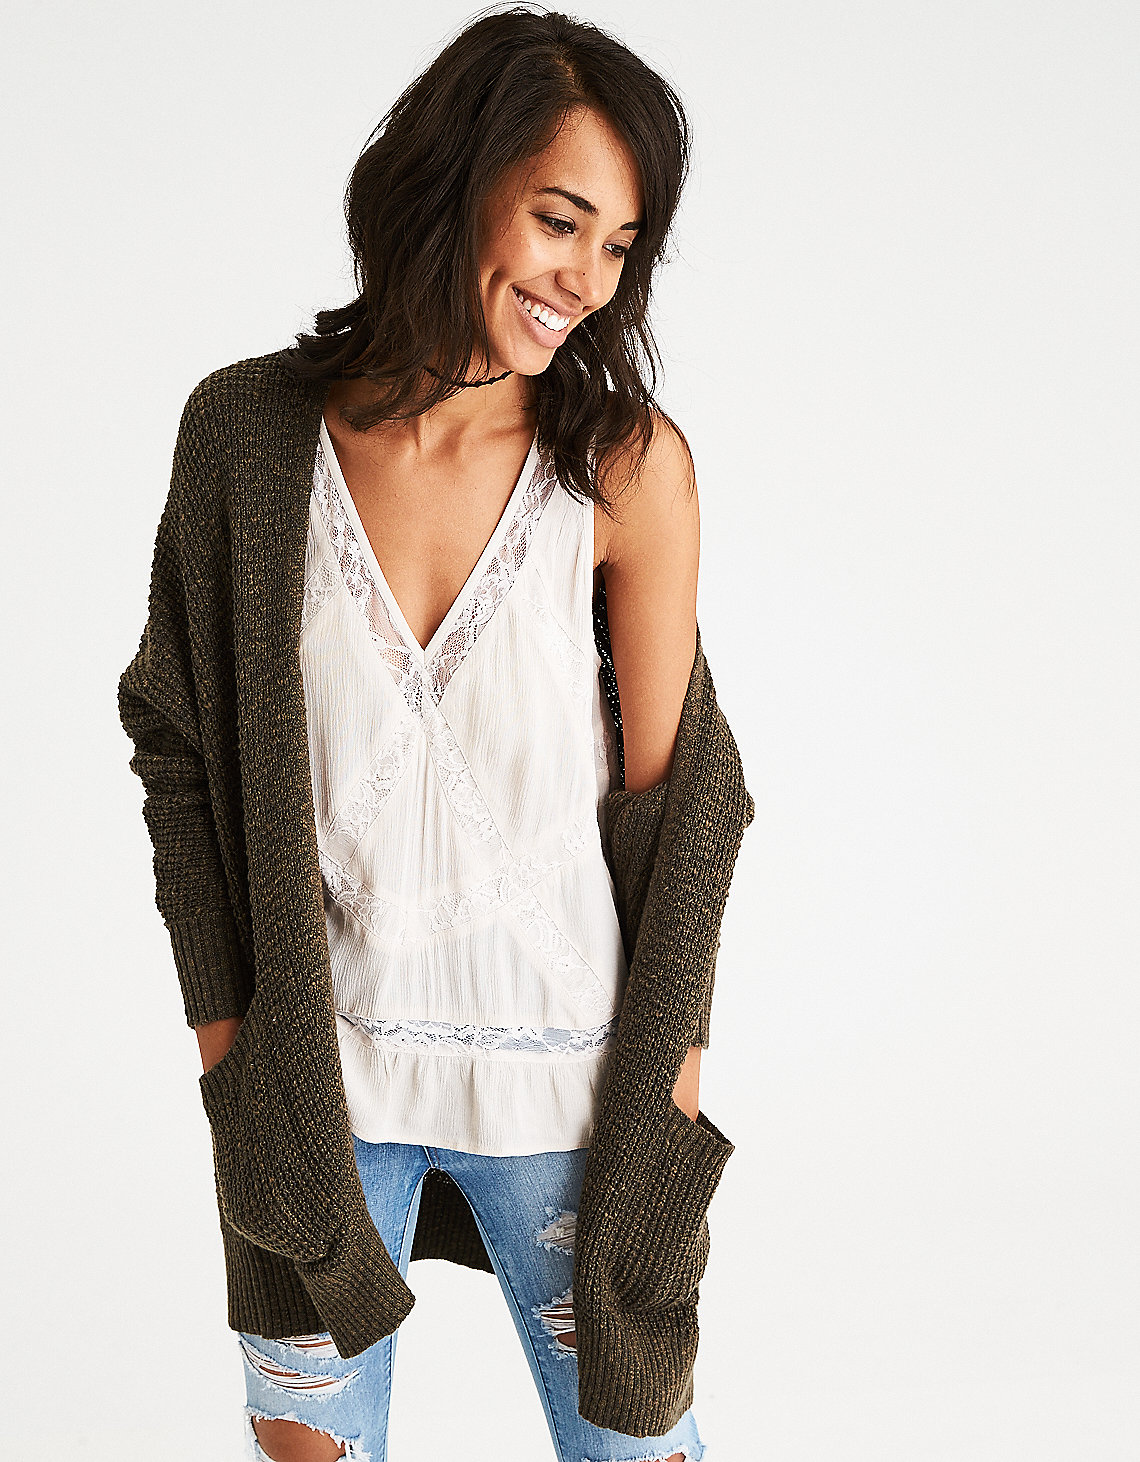 Let yourself be surprised by all the preppy chic goodness at AEO!